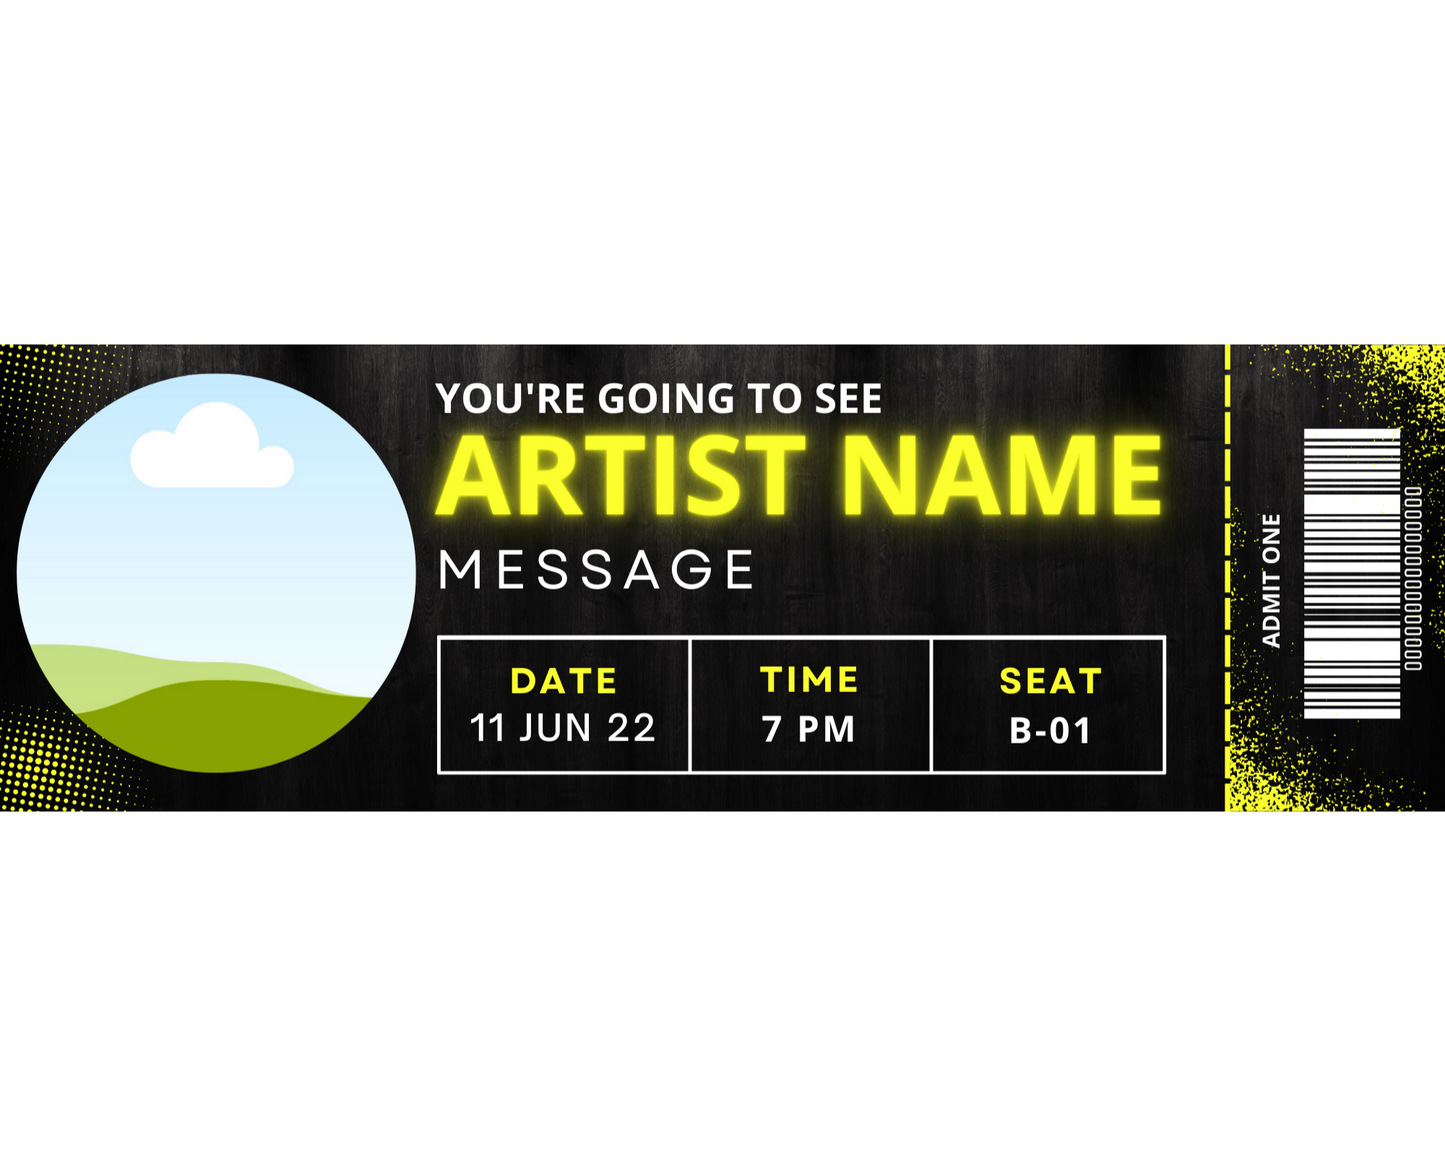 Concert Ticket Template: Add your own picture